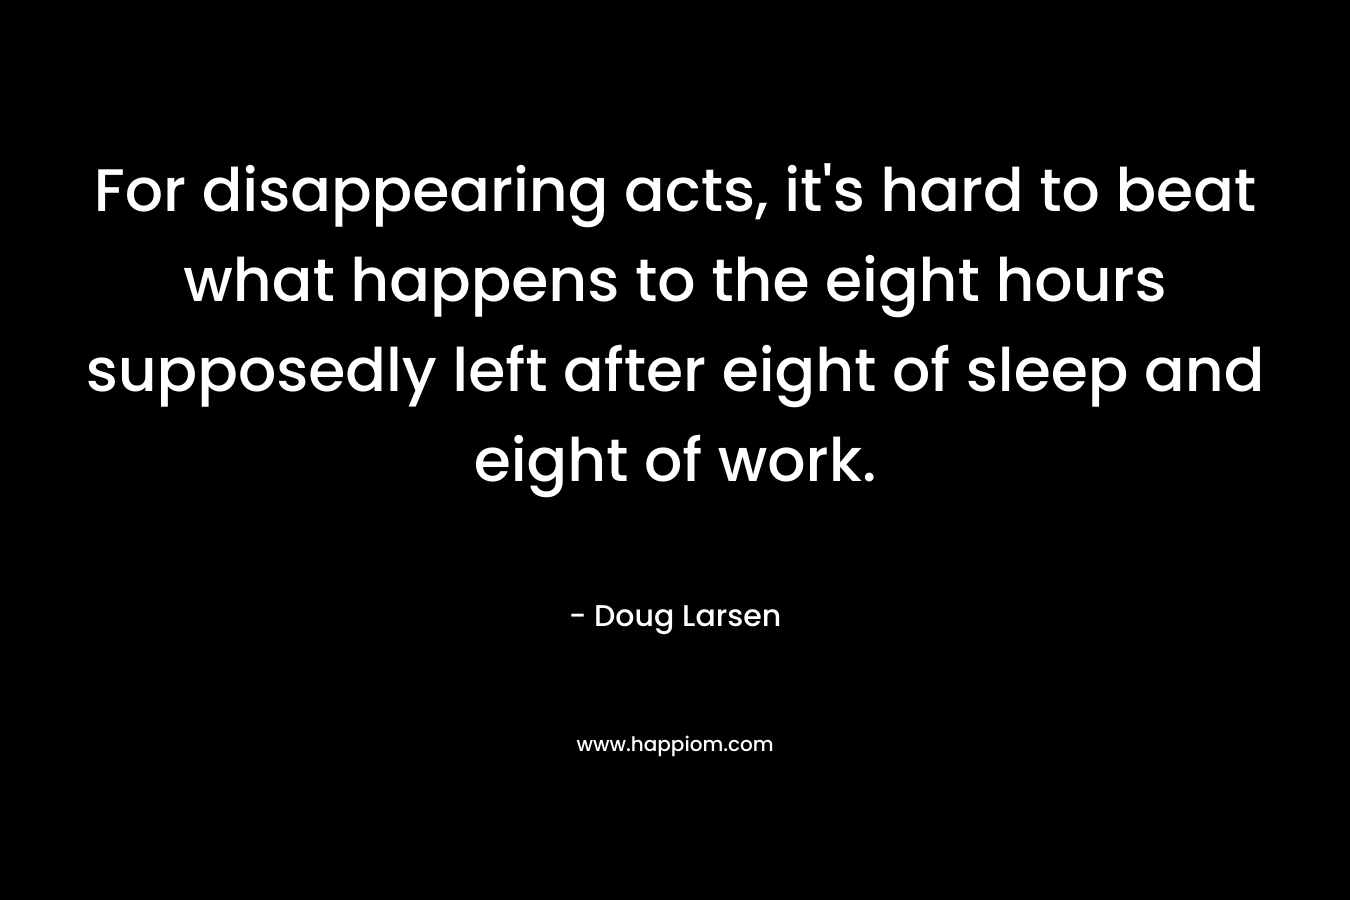 For disappearing acts, it's hard to beat what happens to the eight hours supposedly left after eight of sleep and eight of work.